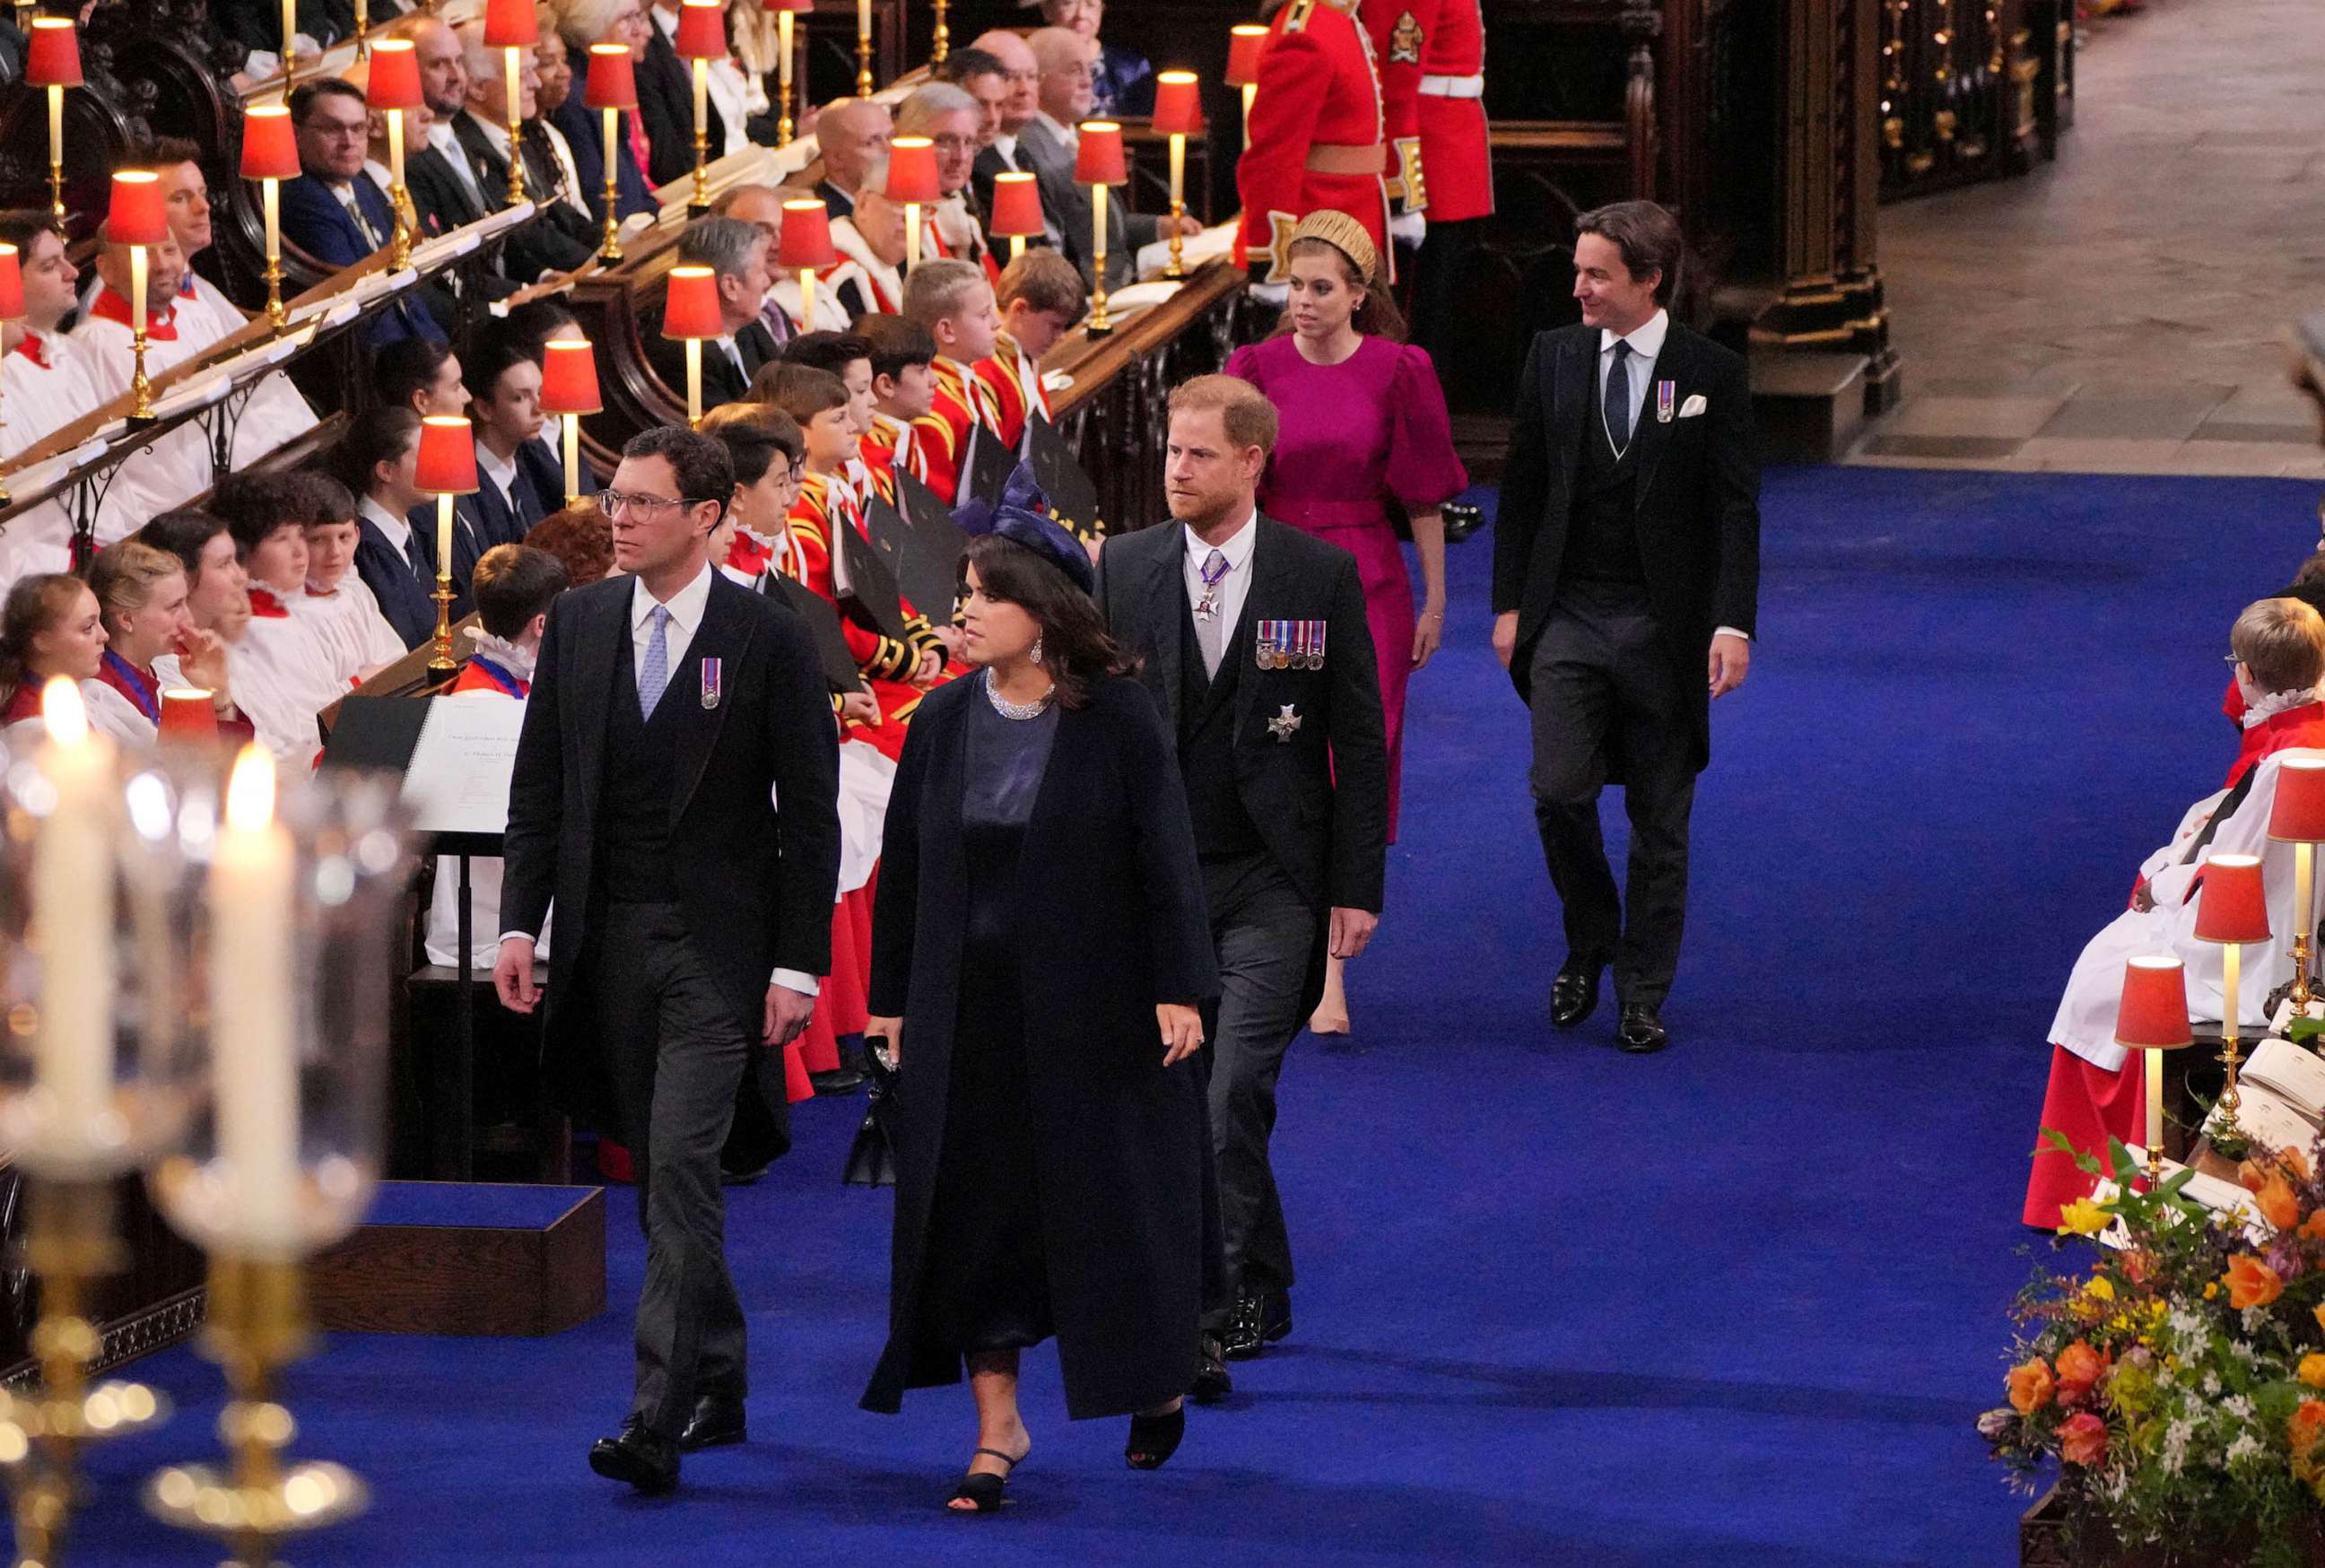 PHOTO: Princess Eugenie and Jack Brooksbank, the Duke of Sussex (center) and Princess Beatrice and Edoardo Mapelli Mozzi at the coronation ceremony of King Charles III and Queen Camilla in Westminster Abbey, London, May 6, 2023.